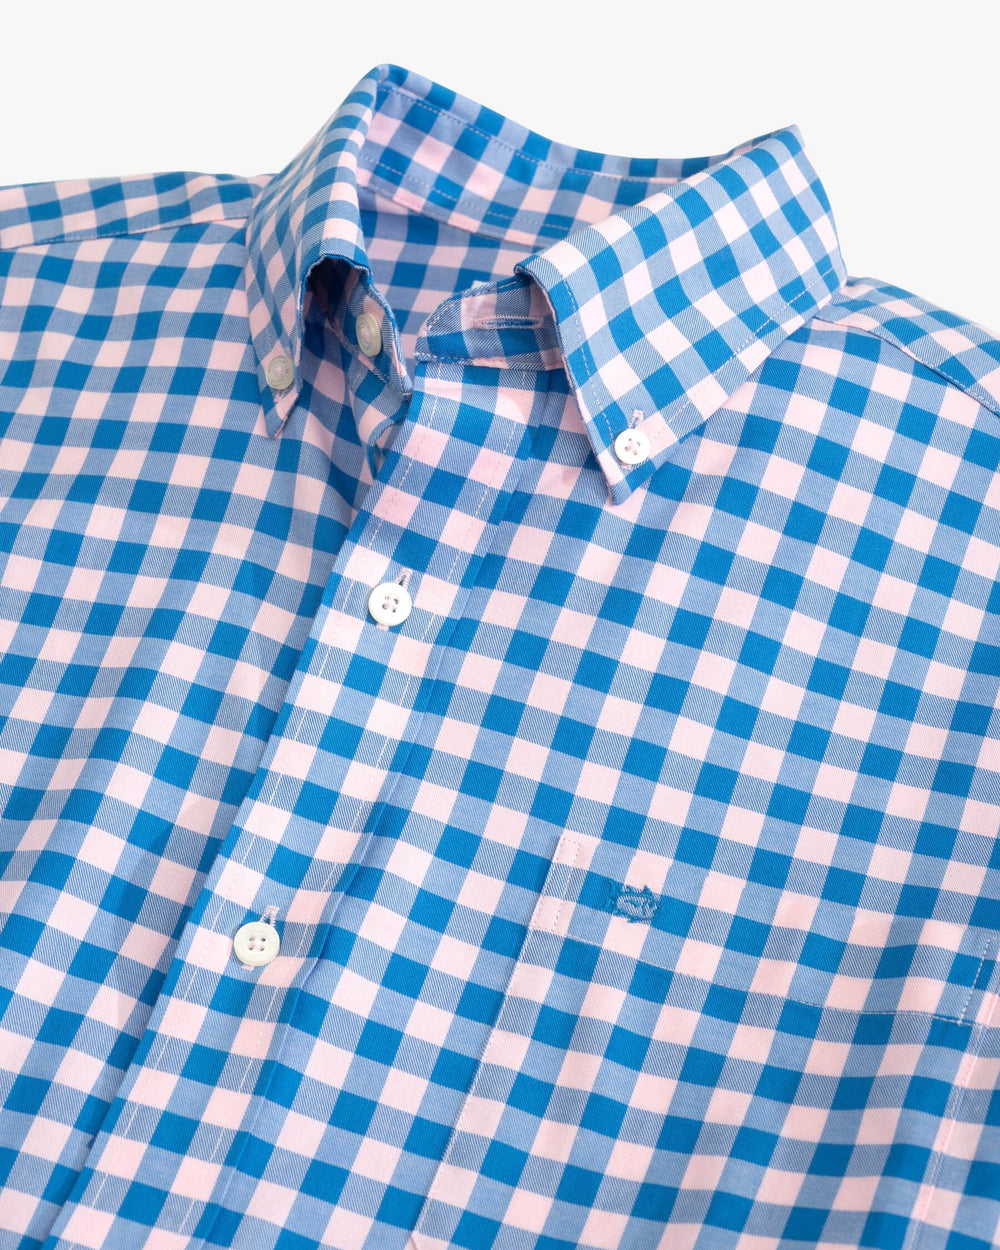 The detail view of the Southern Tide Skipjack Lautner Gingham Intercoastal Sport Shirt by Southern Tide - Rose Blush